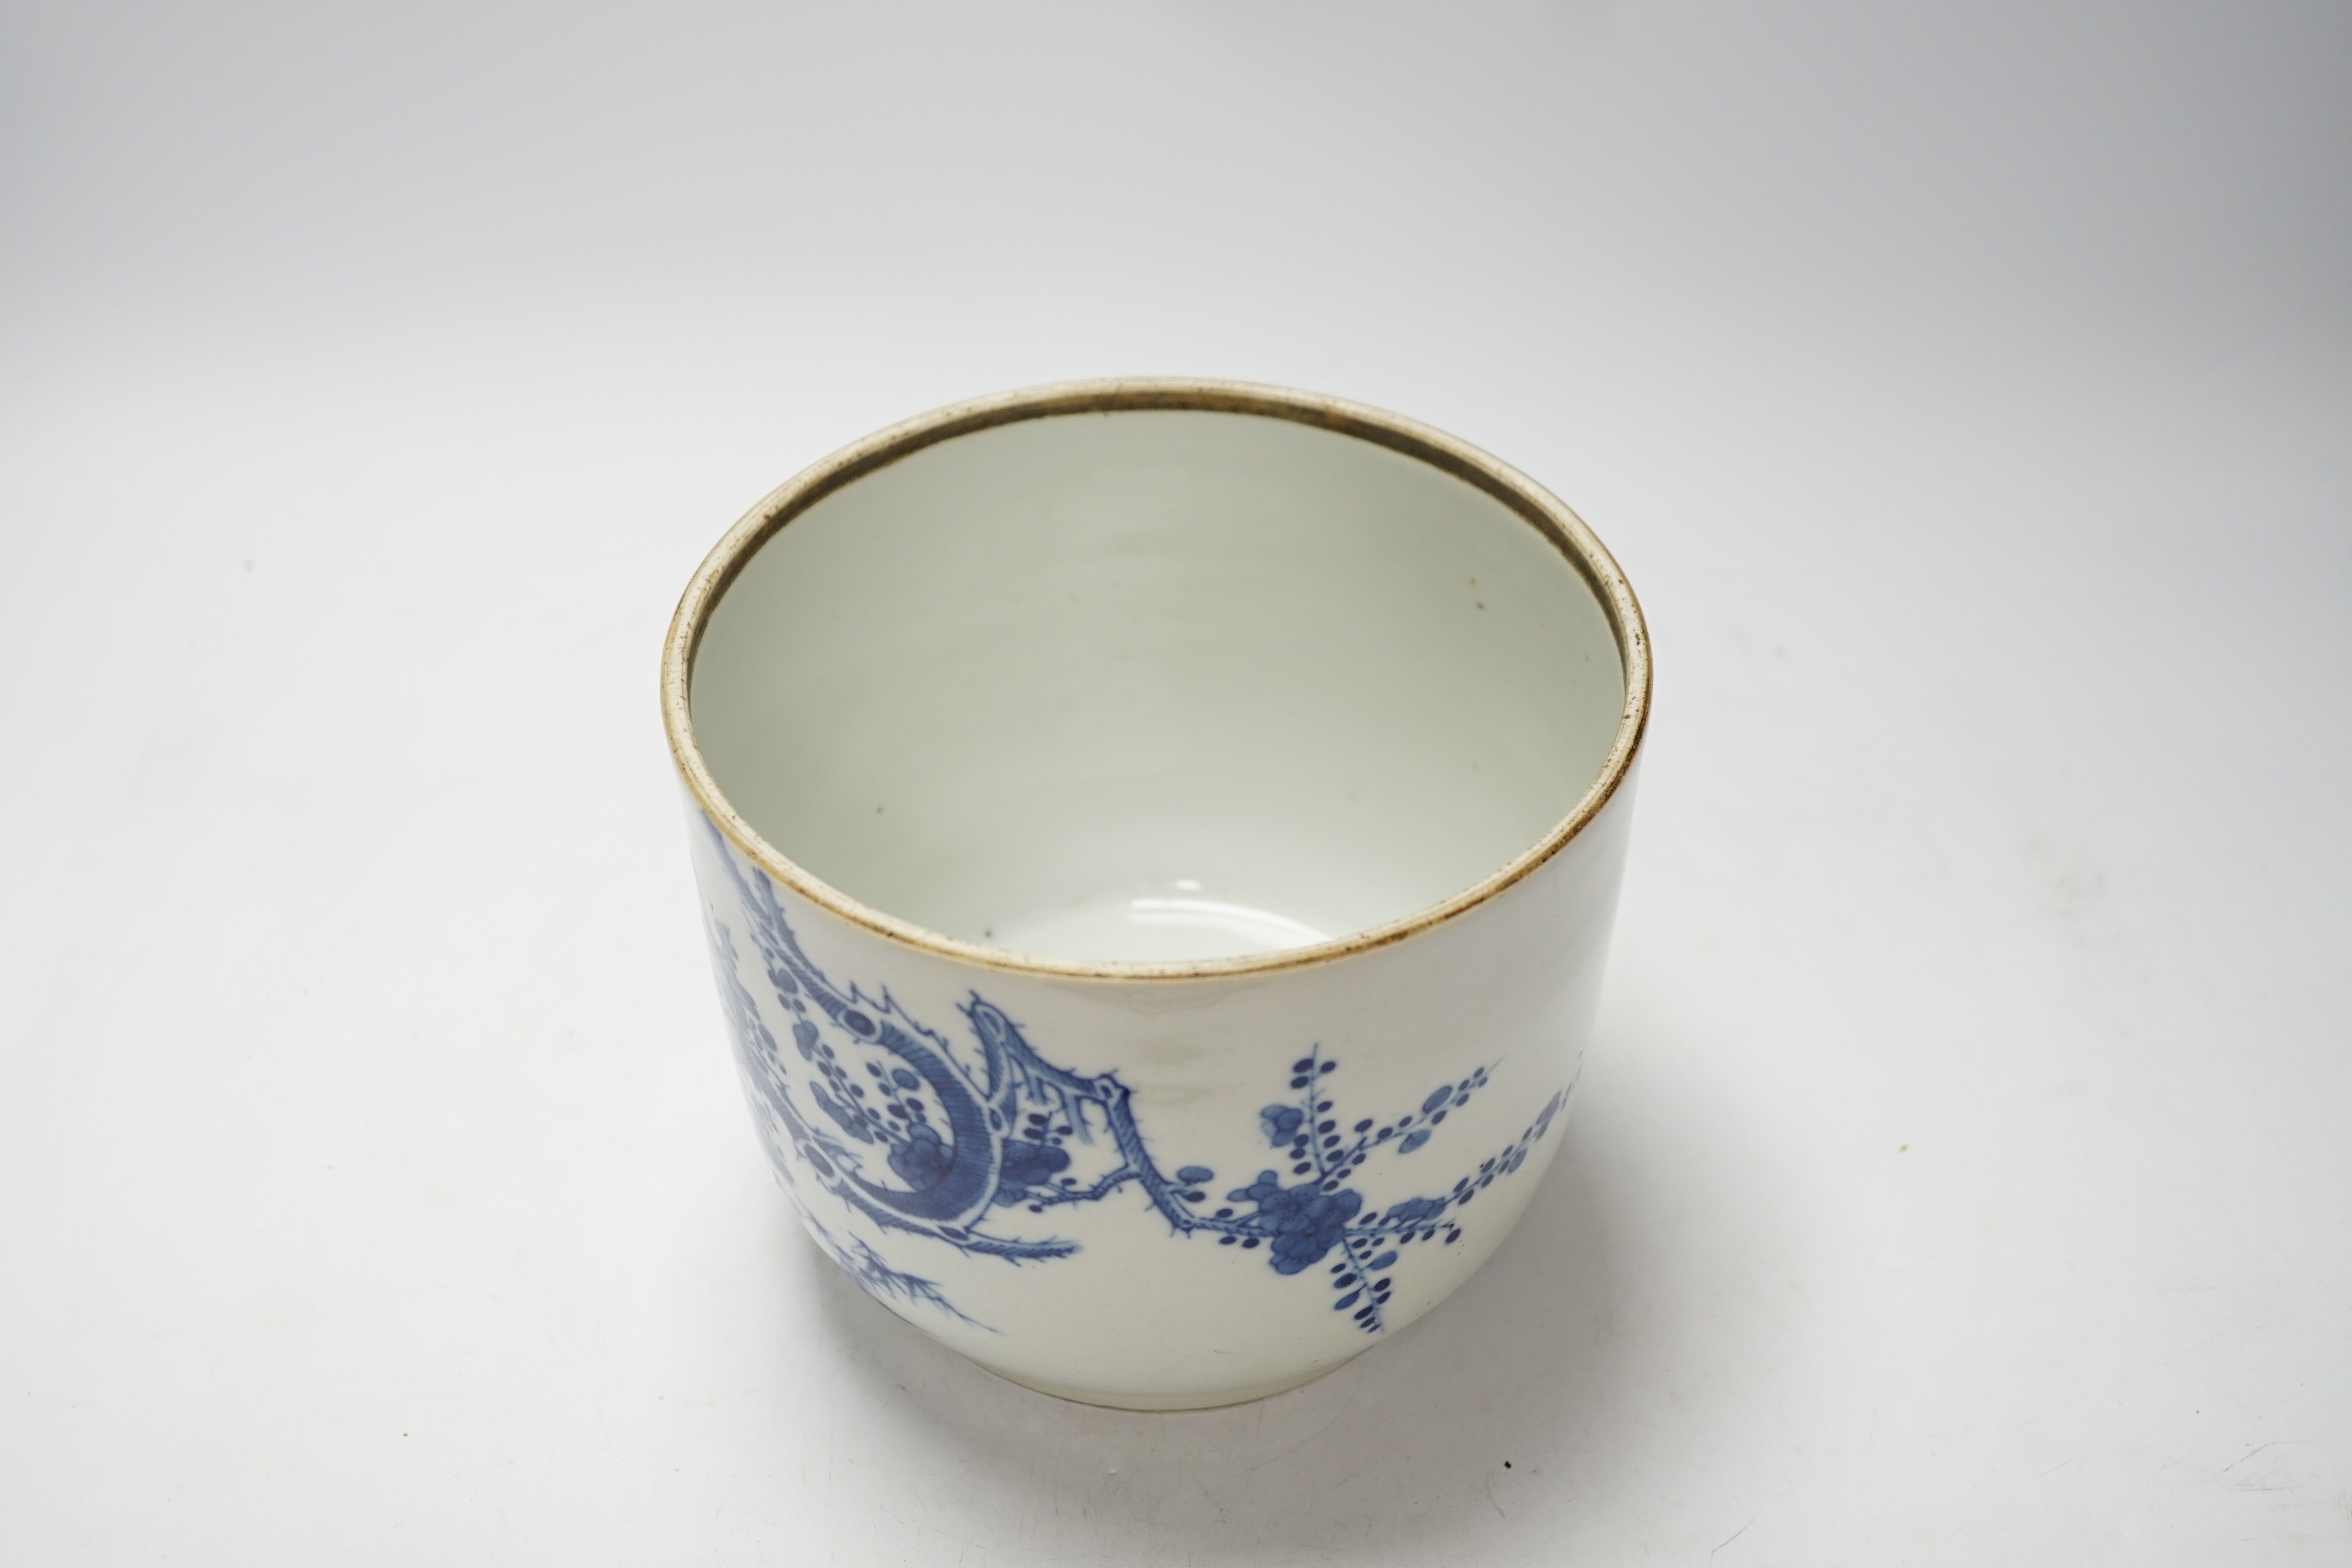 A Chinese porcelain blue and white inscribed jar and cover, 19th century, possibly made for the Vietnamese market, 18cm high